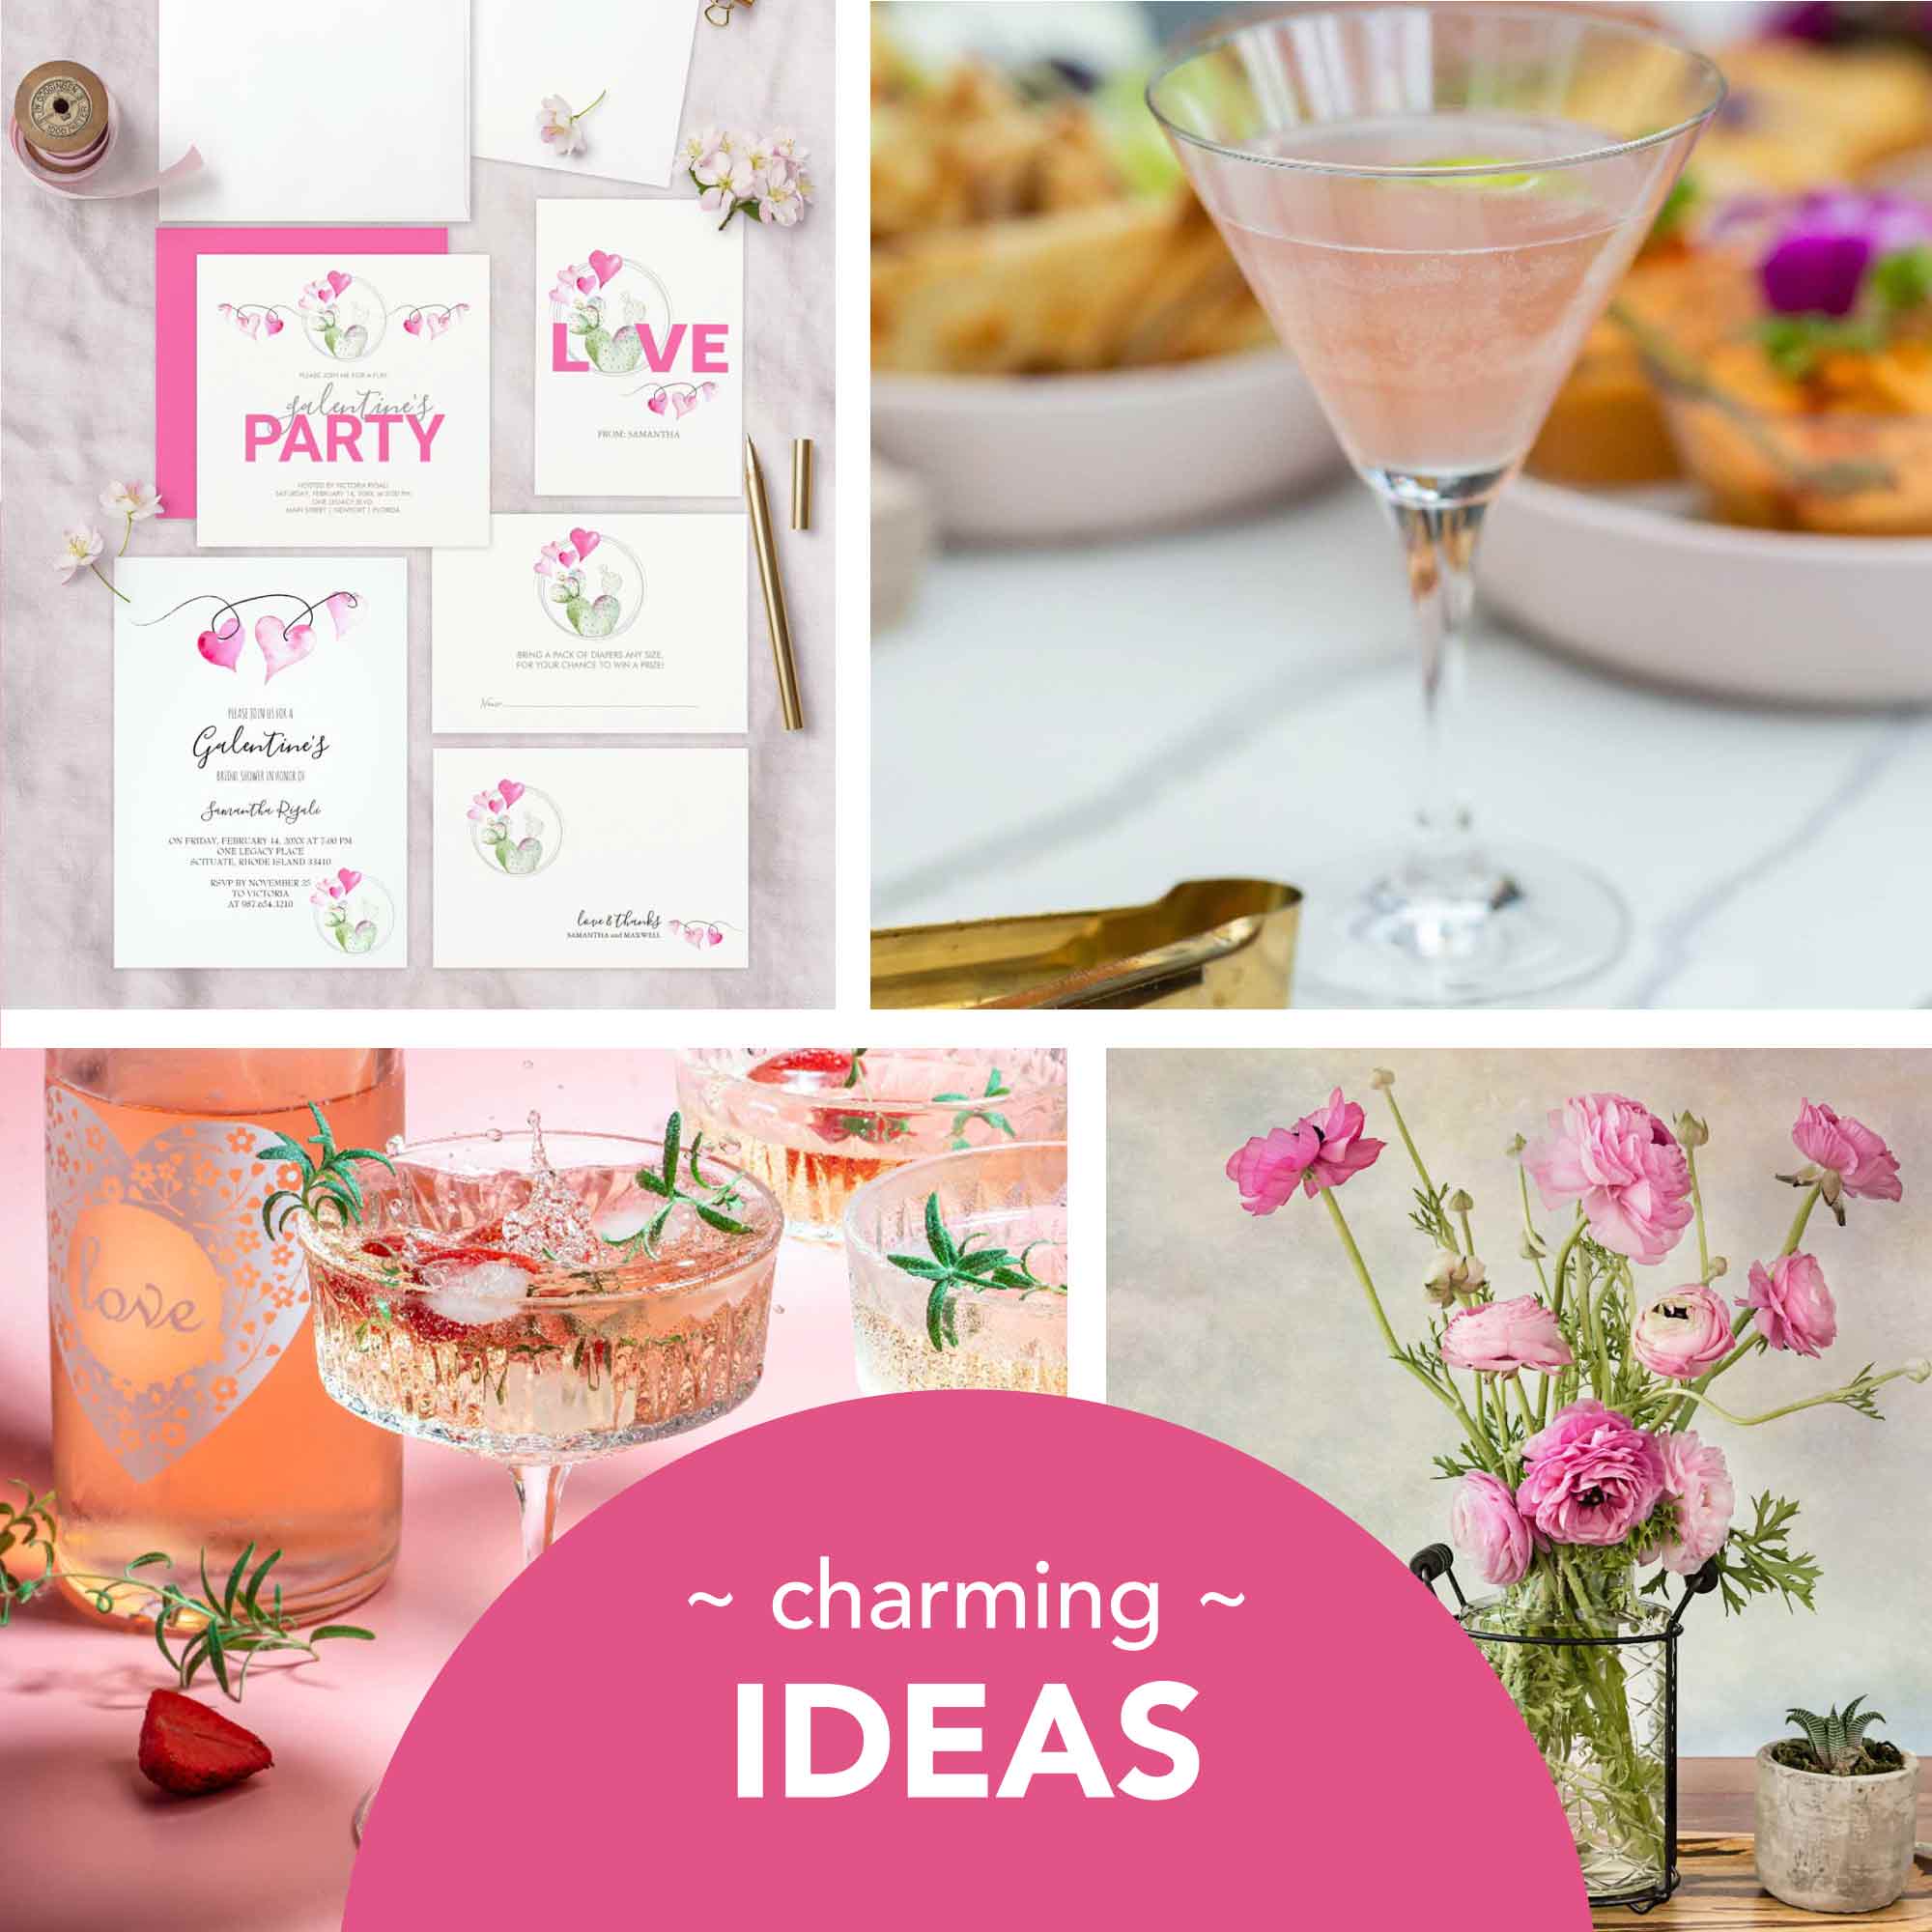 February bridal shower ideas galentines party theme.